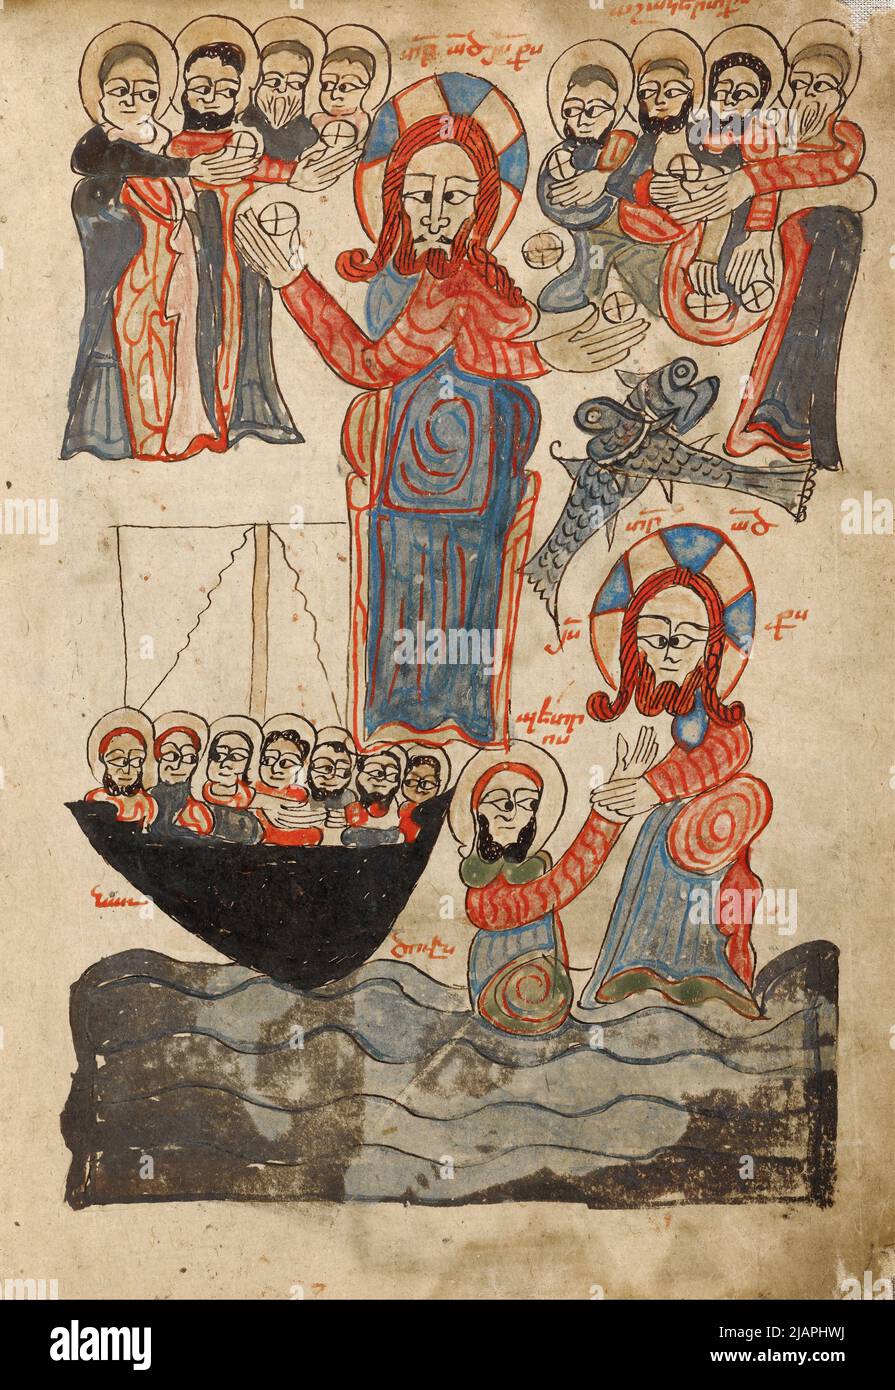 The Feeding of the Five Thousand and Jesus Walking on the Water by an unkown 14th Century illustrator Stock Photo